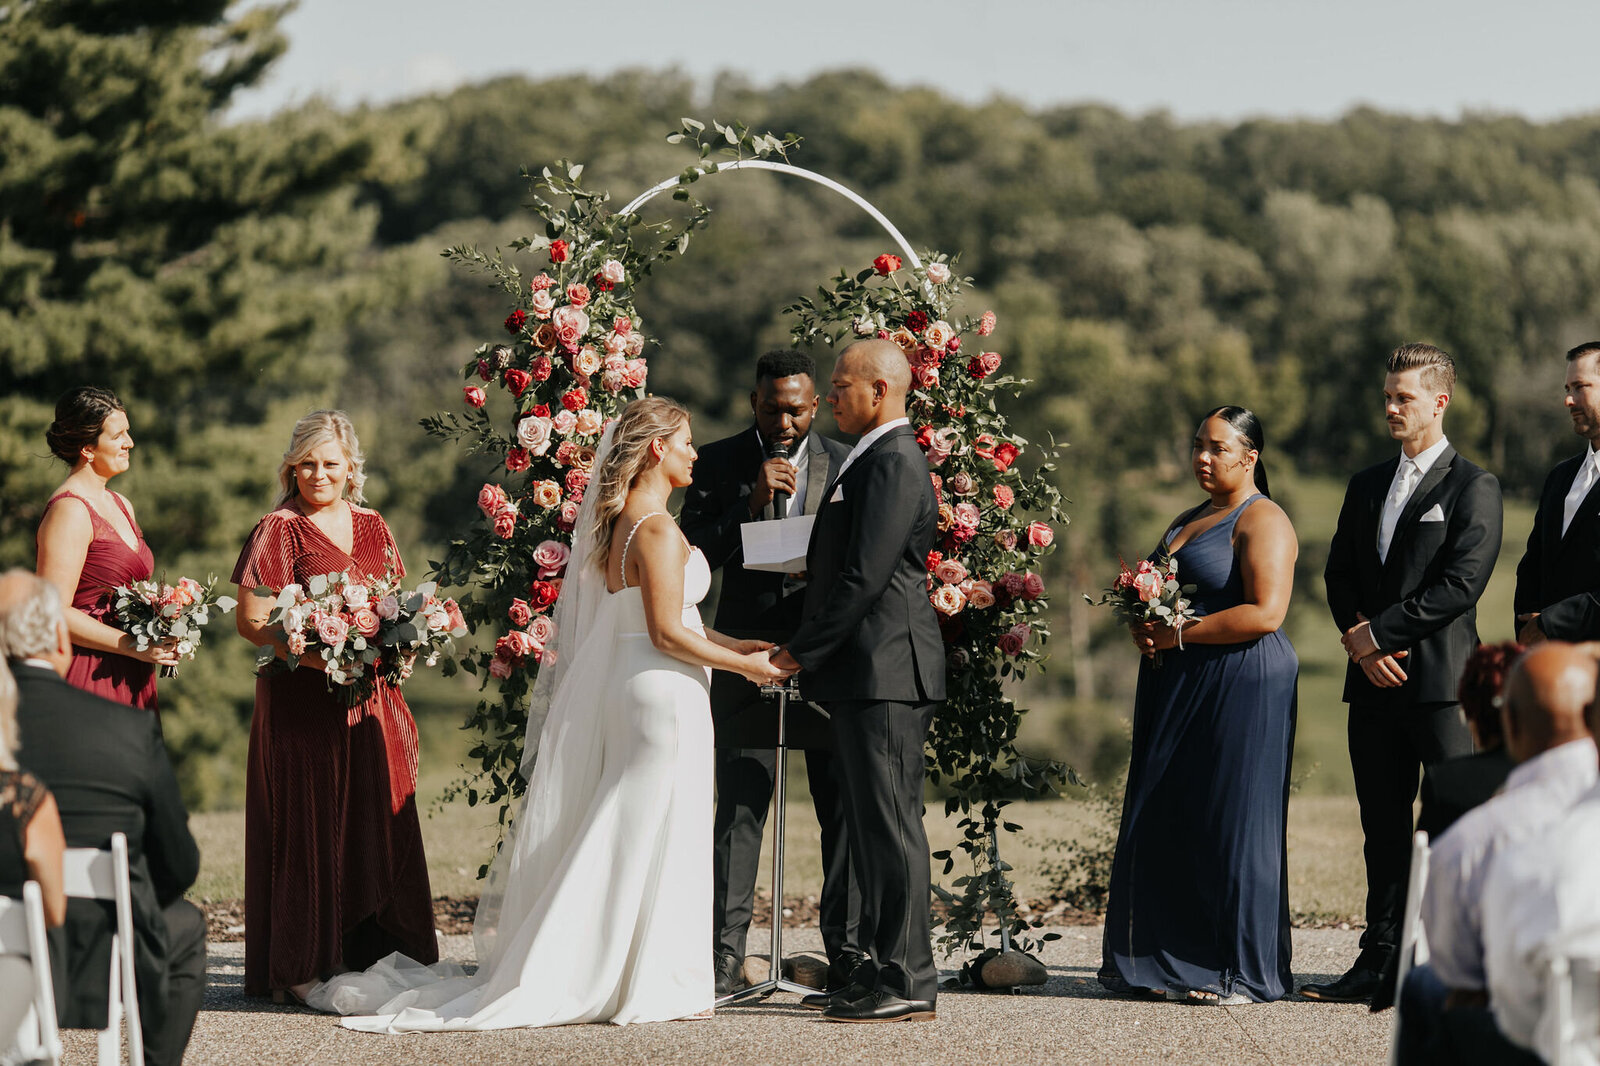 ceremony-outdoors-floral-arch-minnesota-summer